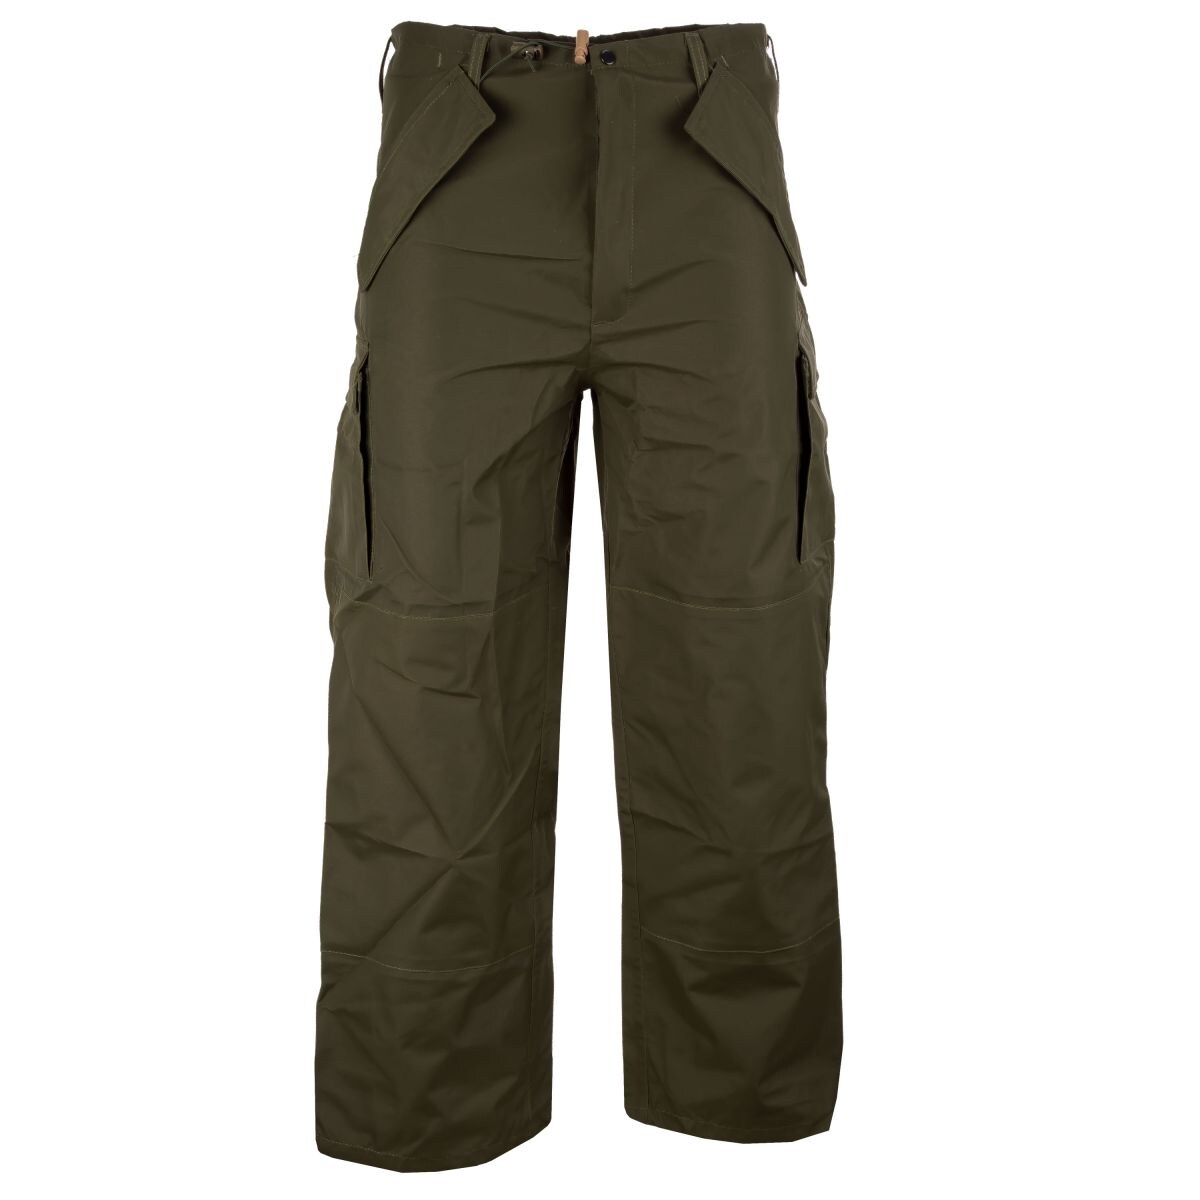 Purchase the Wet Weather Pants MMB olive green by ASMC